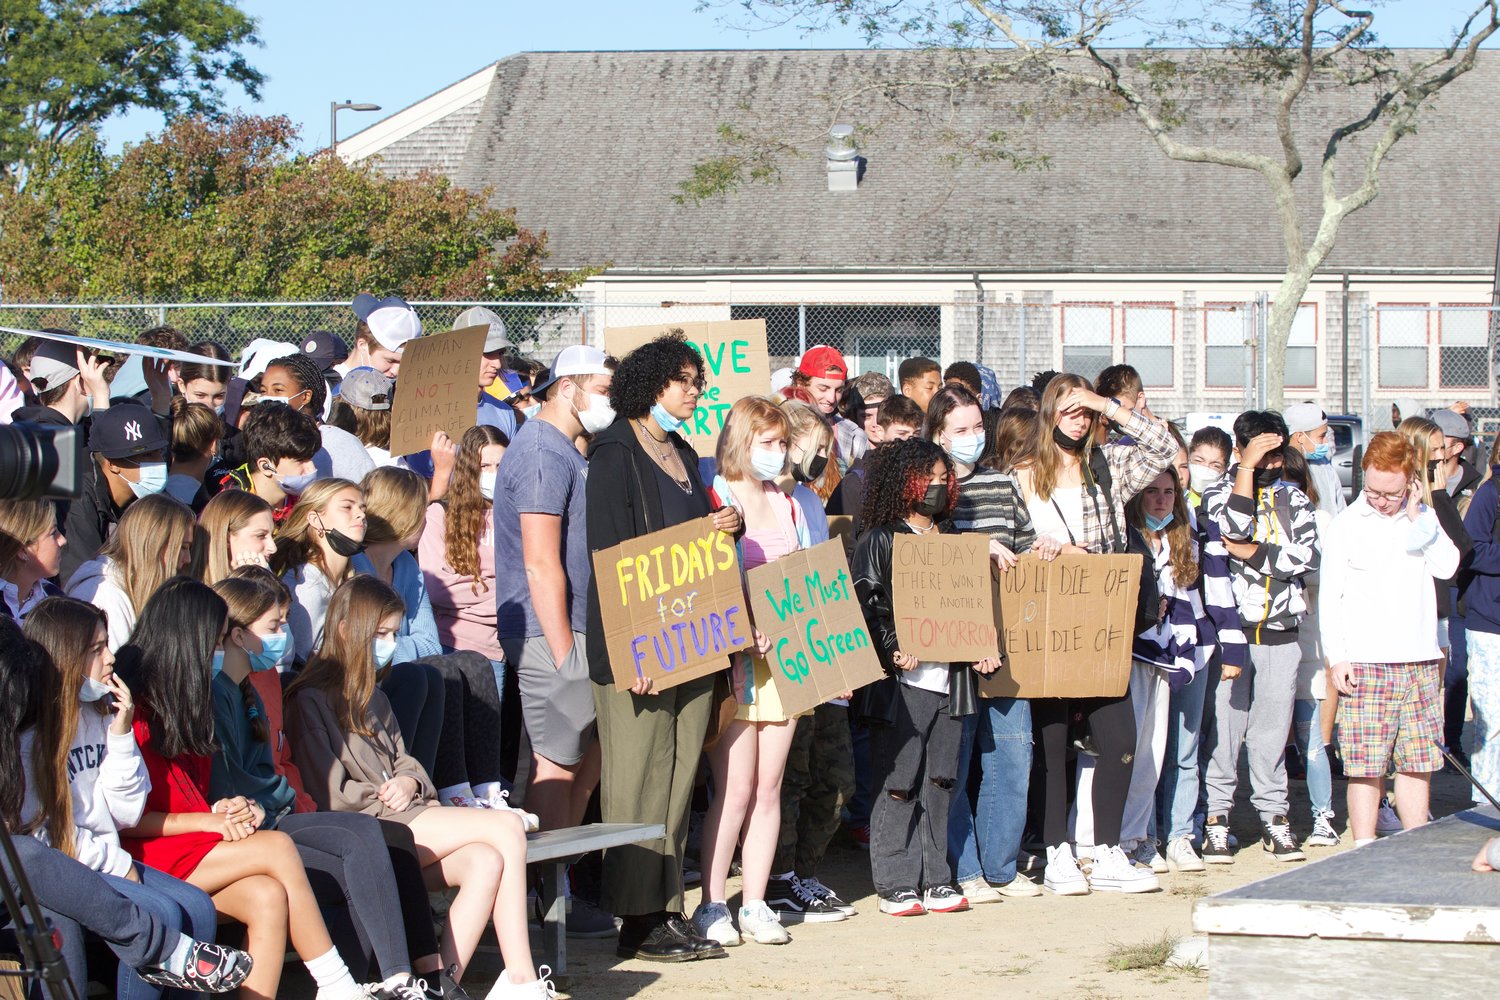 Over 200 students walked out of class Friday to protest government’s lack of action to combat climate change.